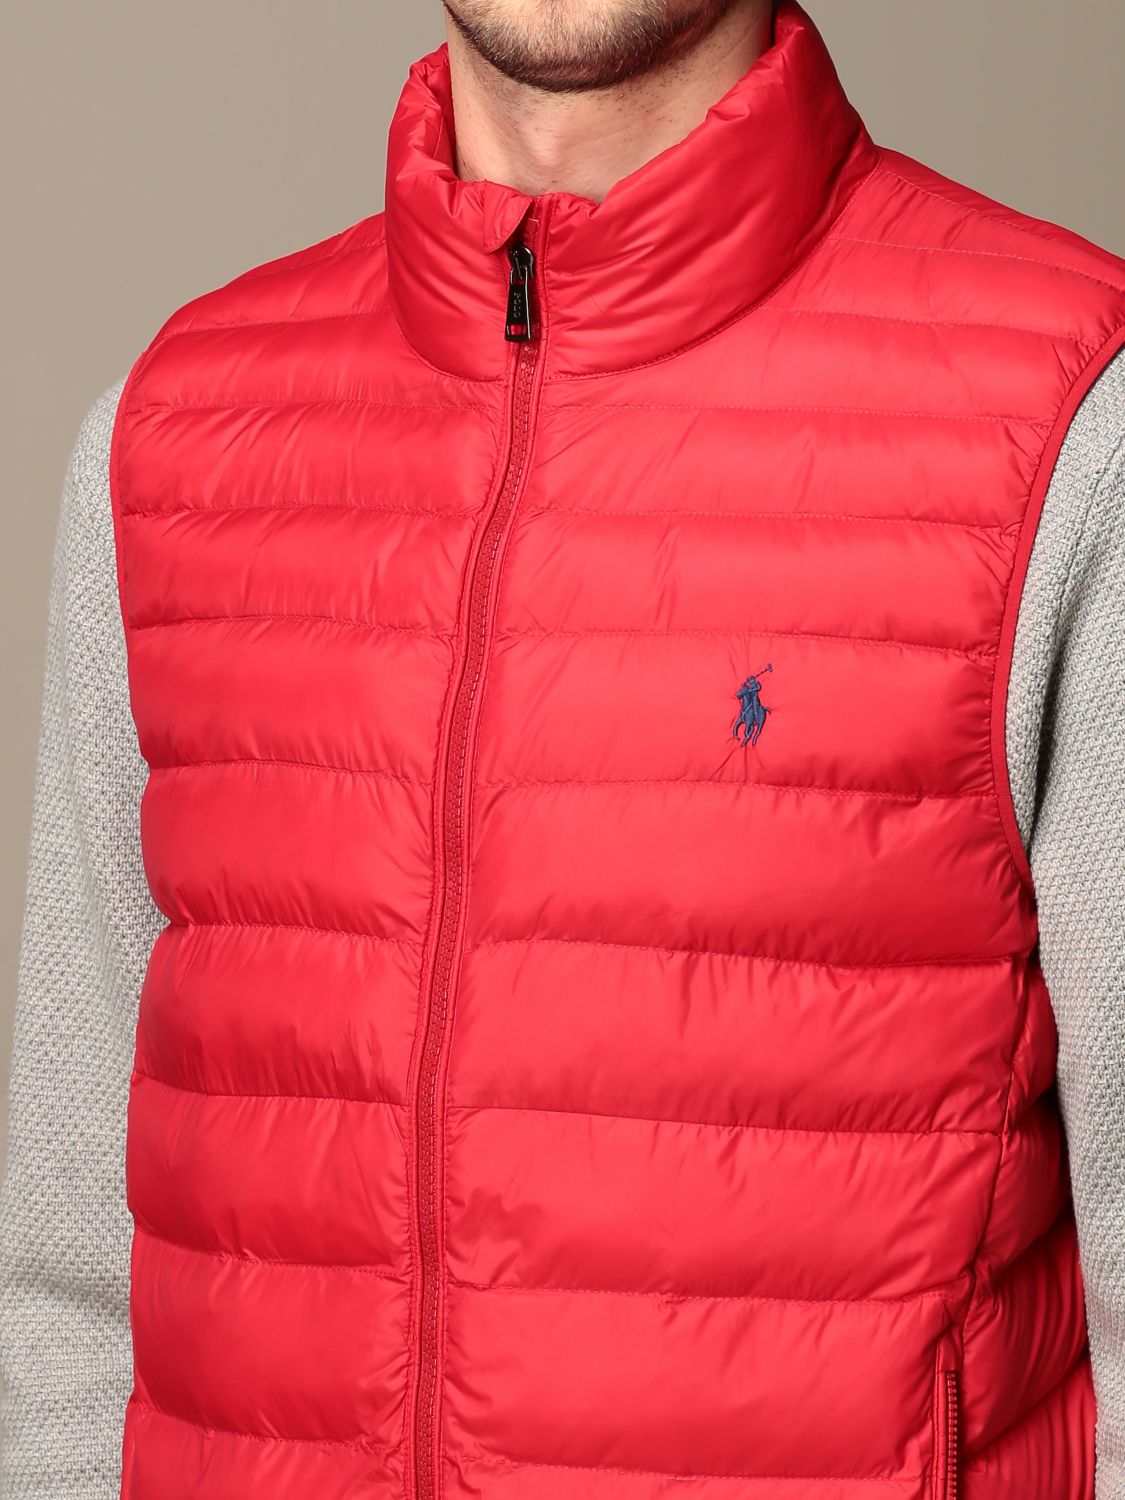 polo and vest